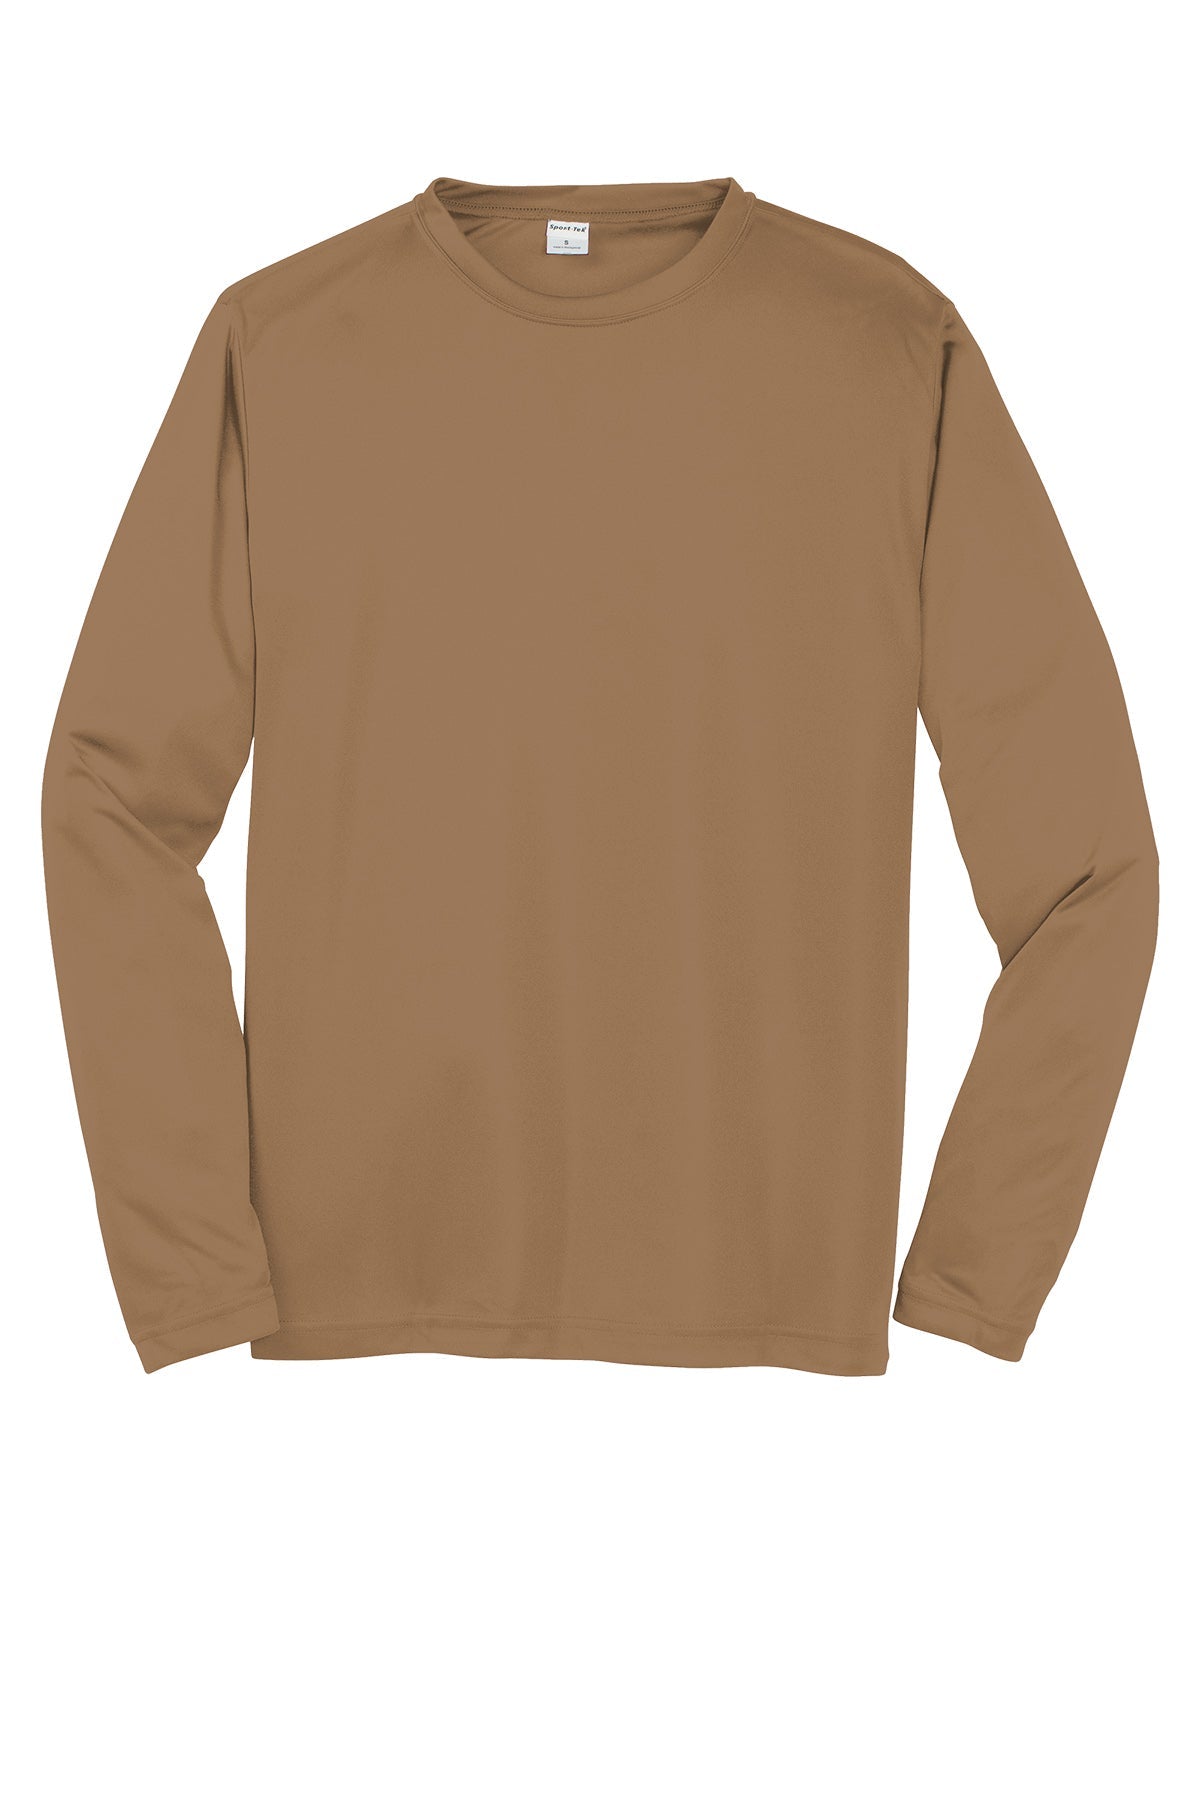 Sport-Tek St350Ls Polyester Adult Long Sleeve T-Shirt Ad Small / Woodland Brown